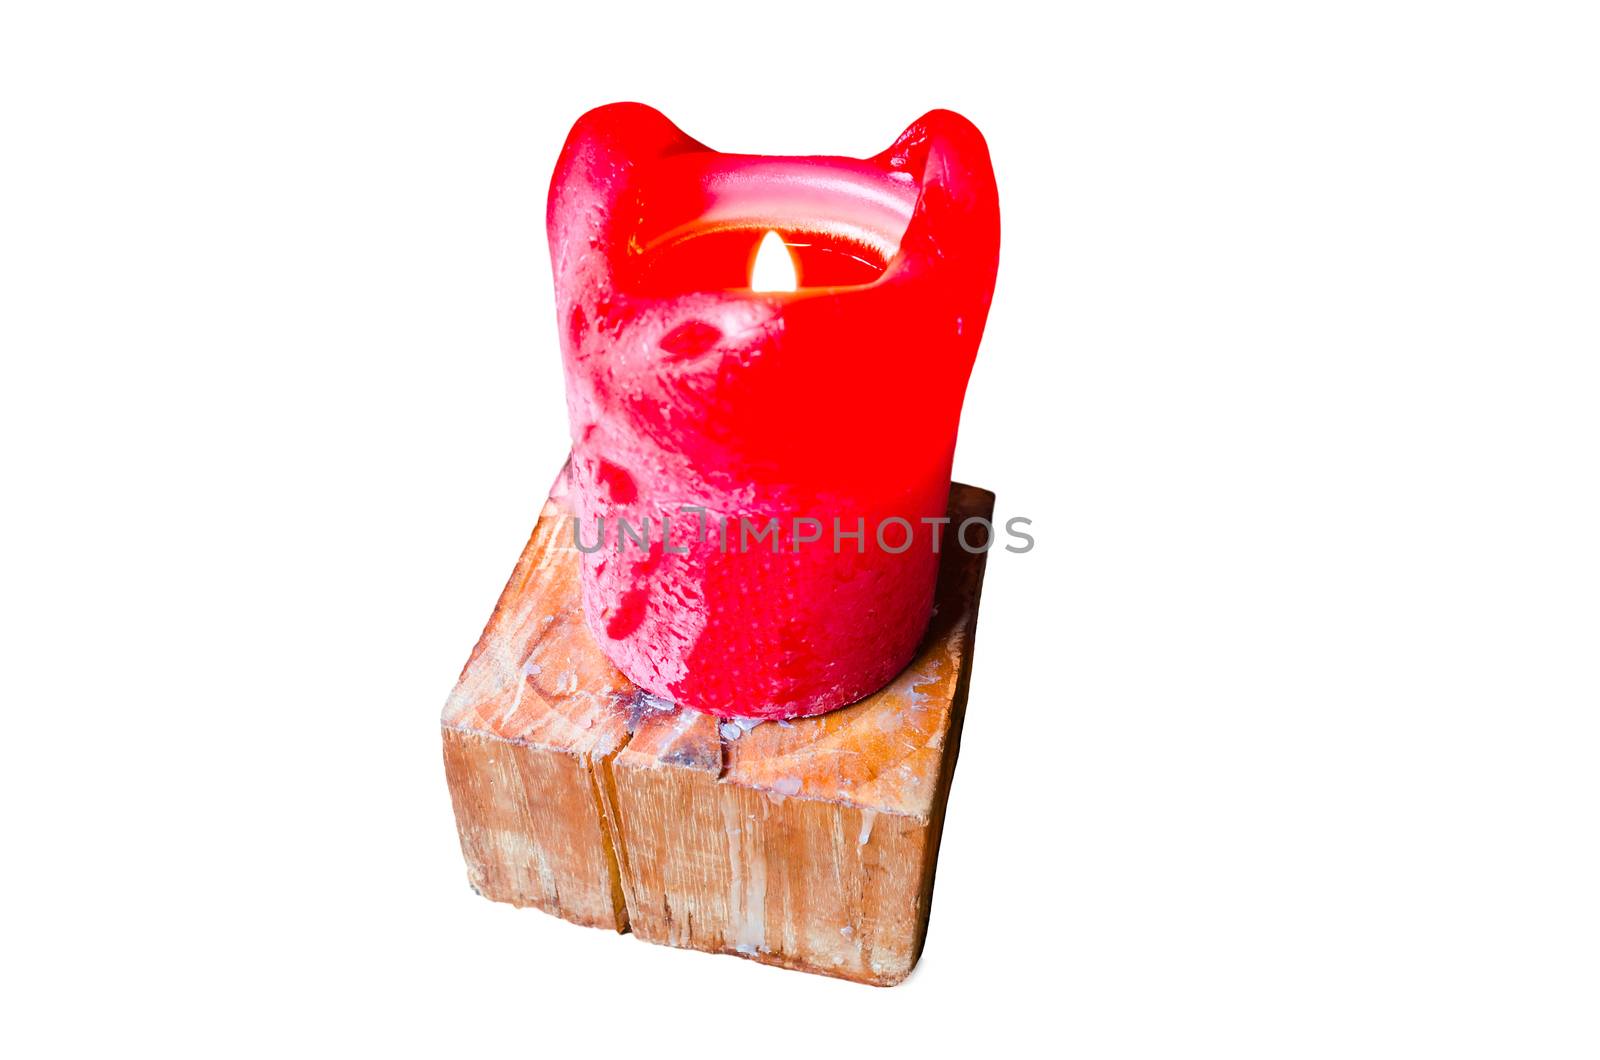 A single burning red candle on a table. Standing on a wooden candle stand. On a white background